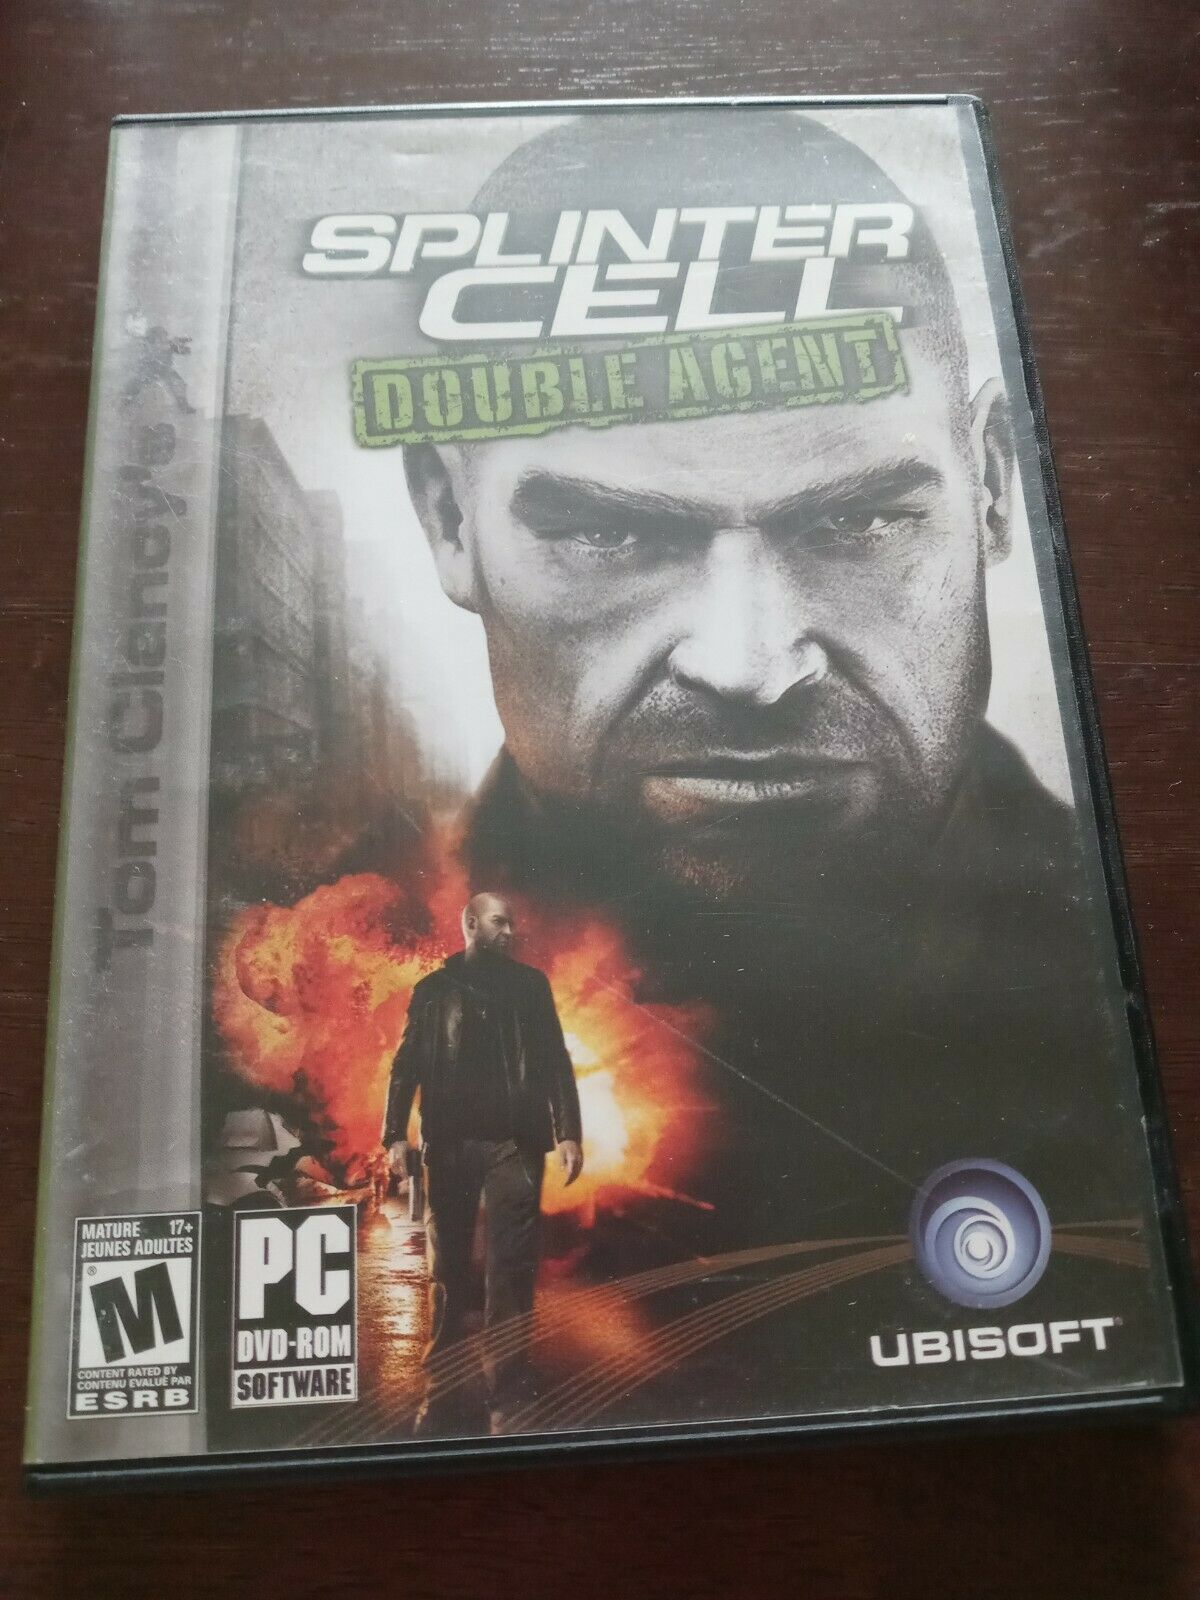 Primary image for Tom Clancy's Splinter Cell: Double Agent PC